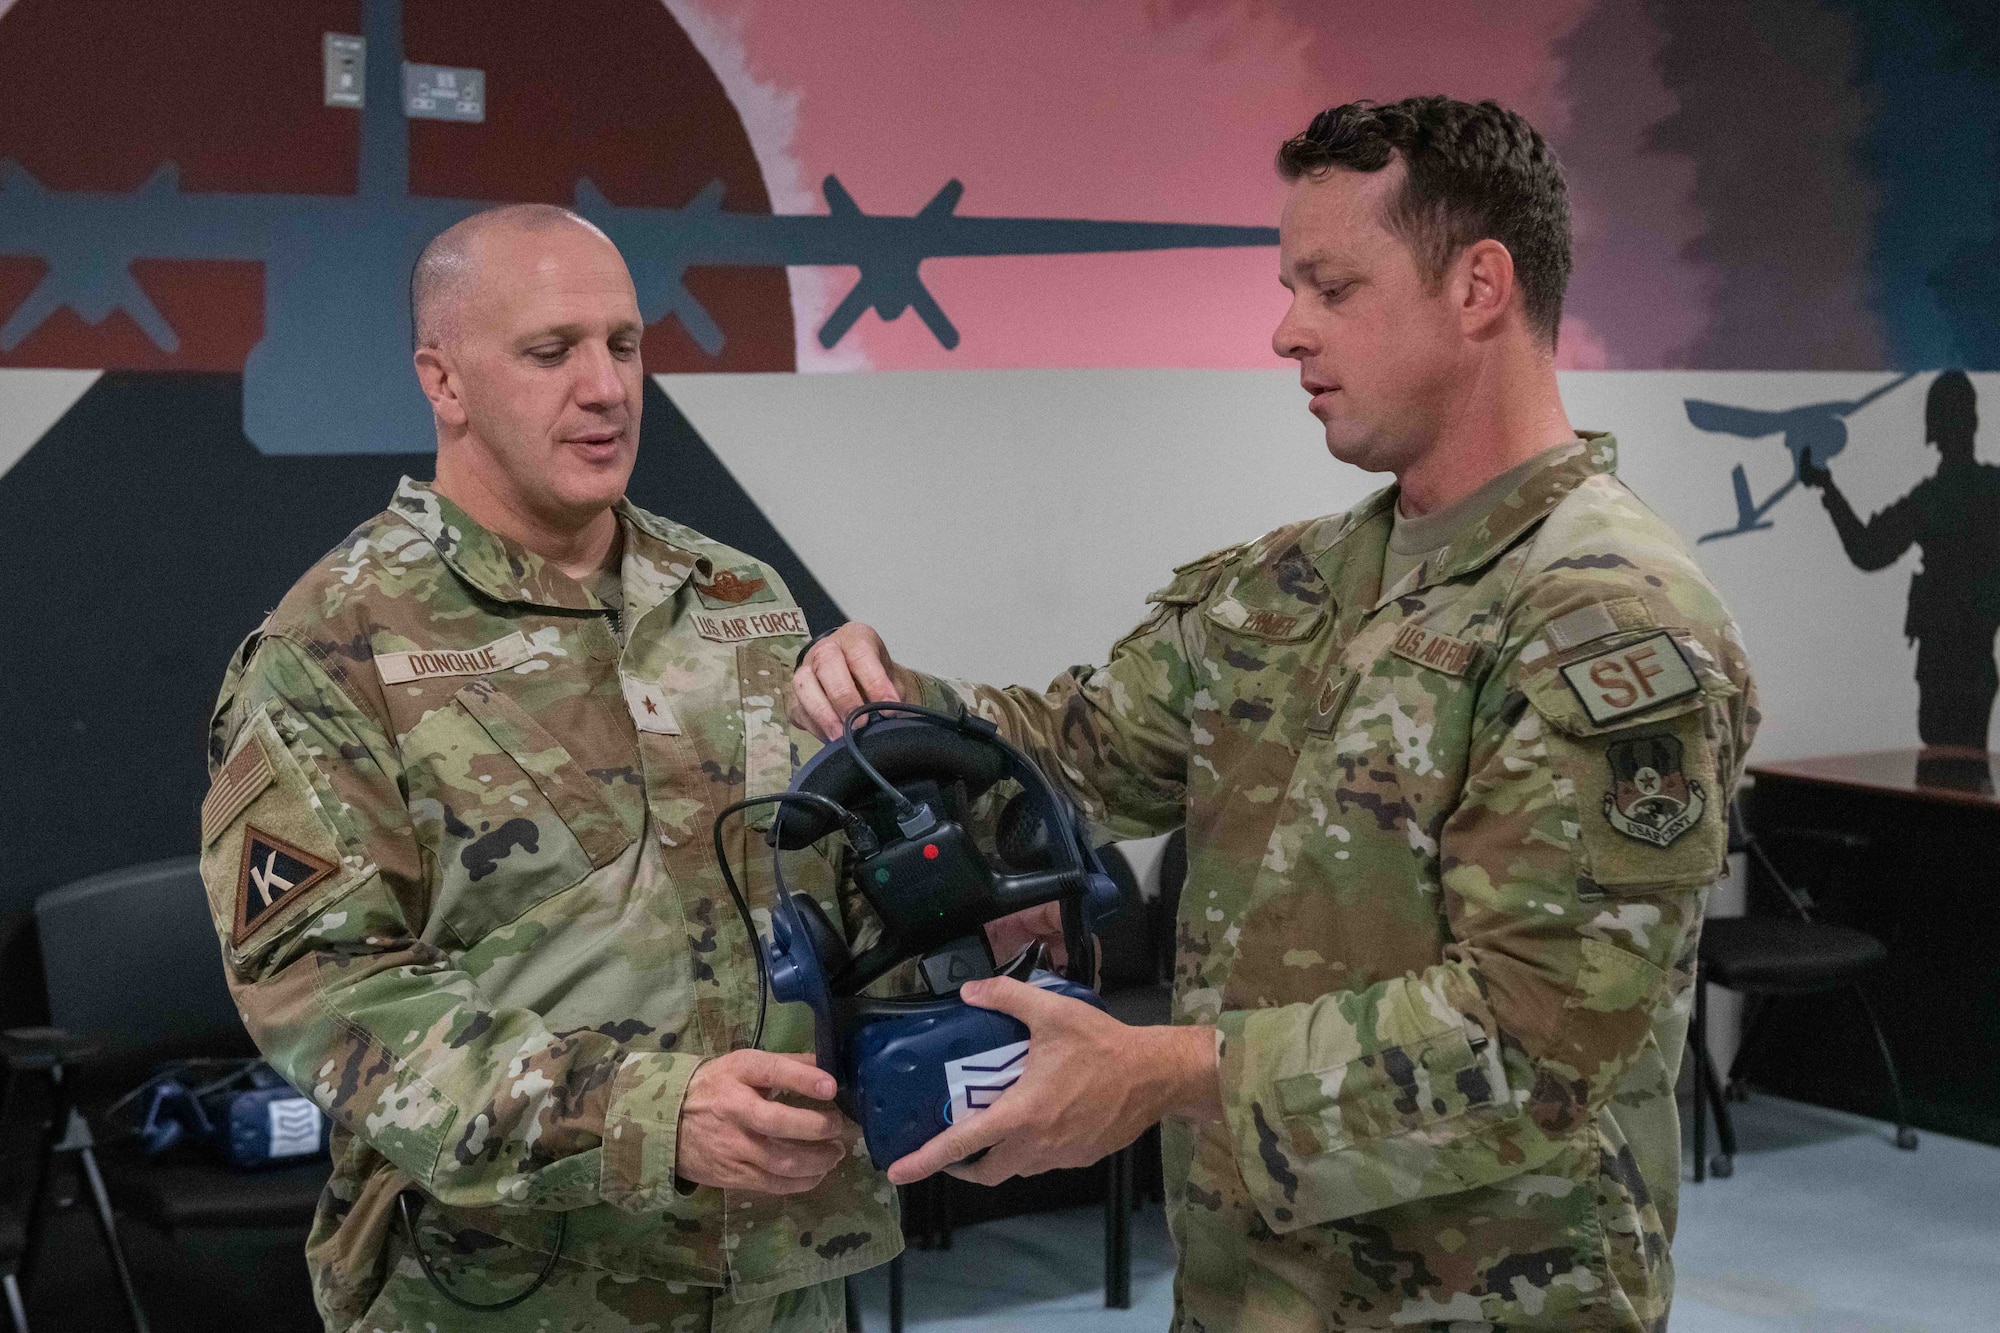 U.S. Air Force Tech Sgt. Jesse Ermer, a 379th Air Expeditionary Security Forces Squadron member, demonstrates to U.S. Air Force Brig. Gen. Gerald Donohue, 379th Air Expeditionary Wing Commander, how to use a virtual reality headset on Al Udeid Air Base, Qatar, May 24, 2022. The headset is part of a new training tool that security forces received, called the Street Smart VR Simulator. (U.S. Air National Guard photo by Airman 1st Class Constantine Bambakidis)